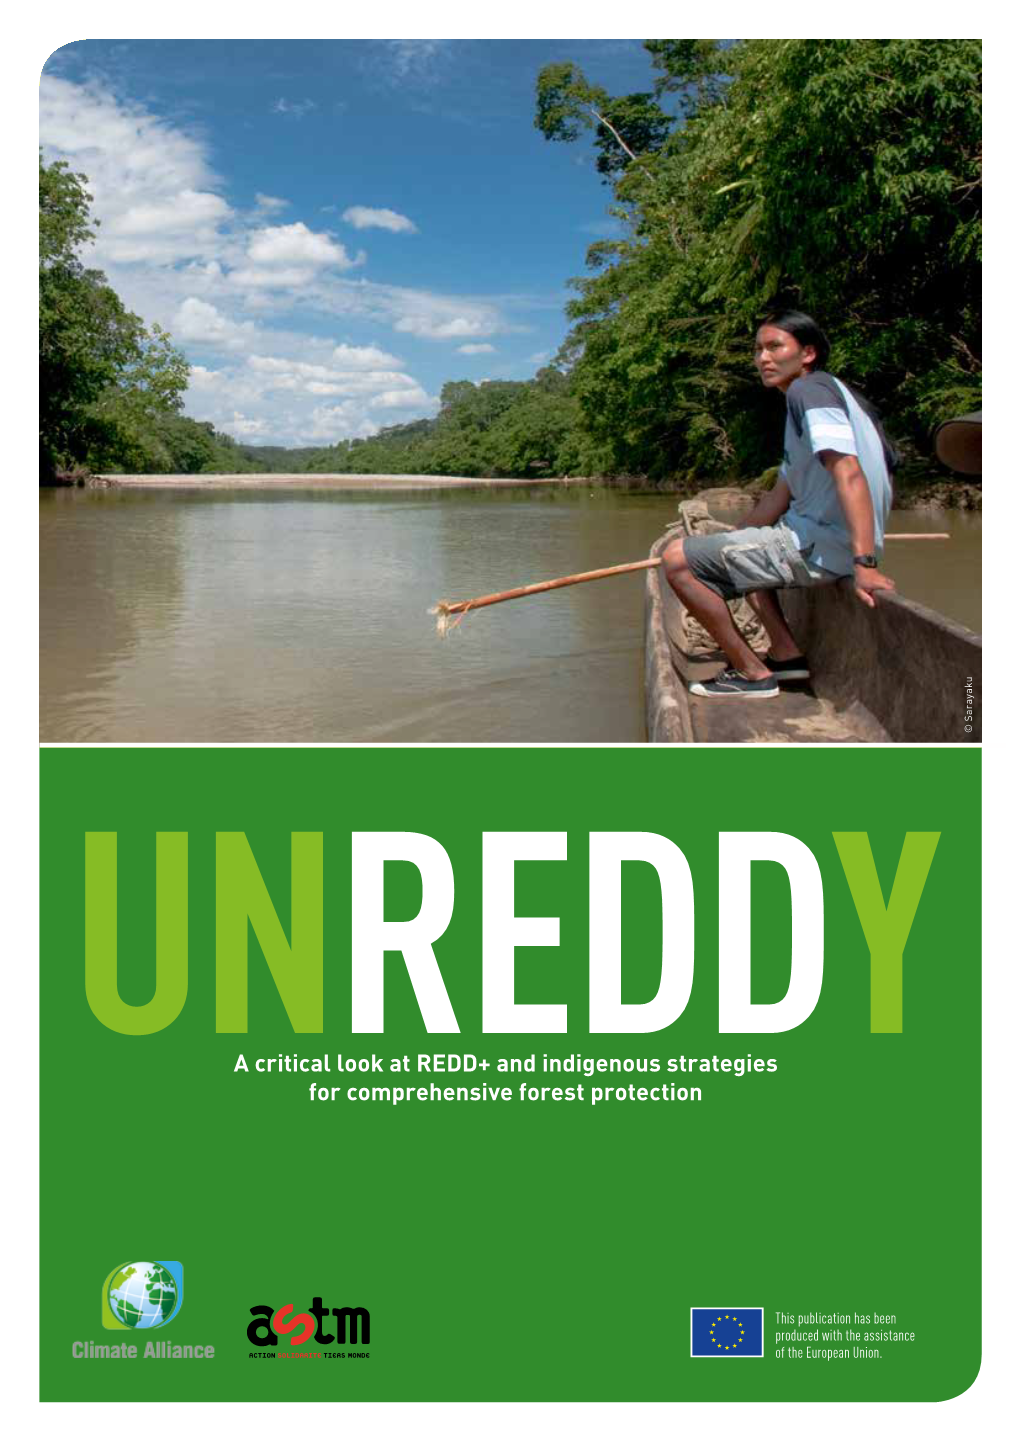 UNREDDY – a Critical Look at REDD+ and Indigenous Strategies for Comprehensive Forest Protection